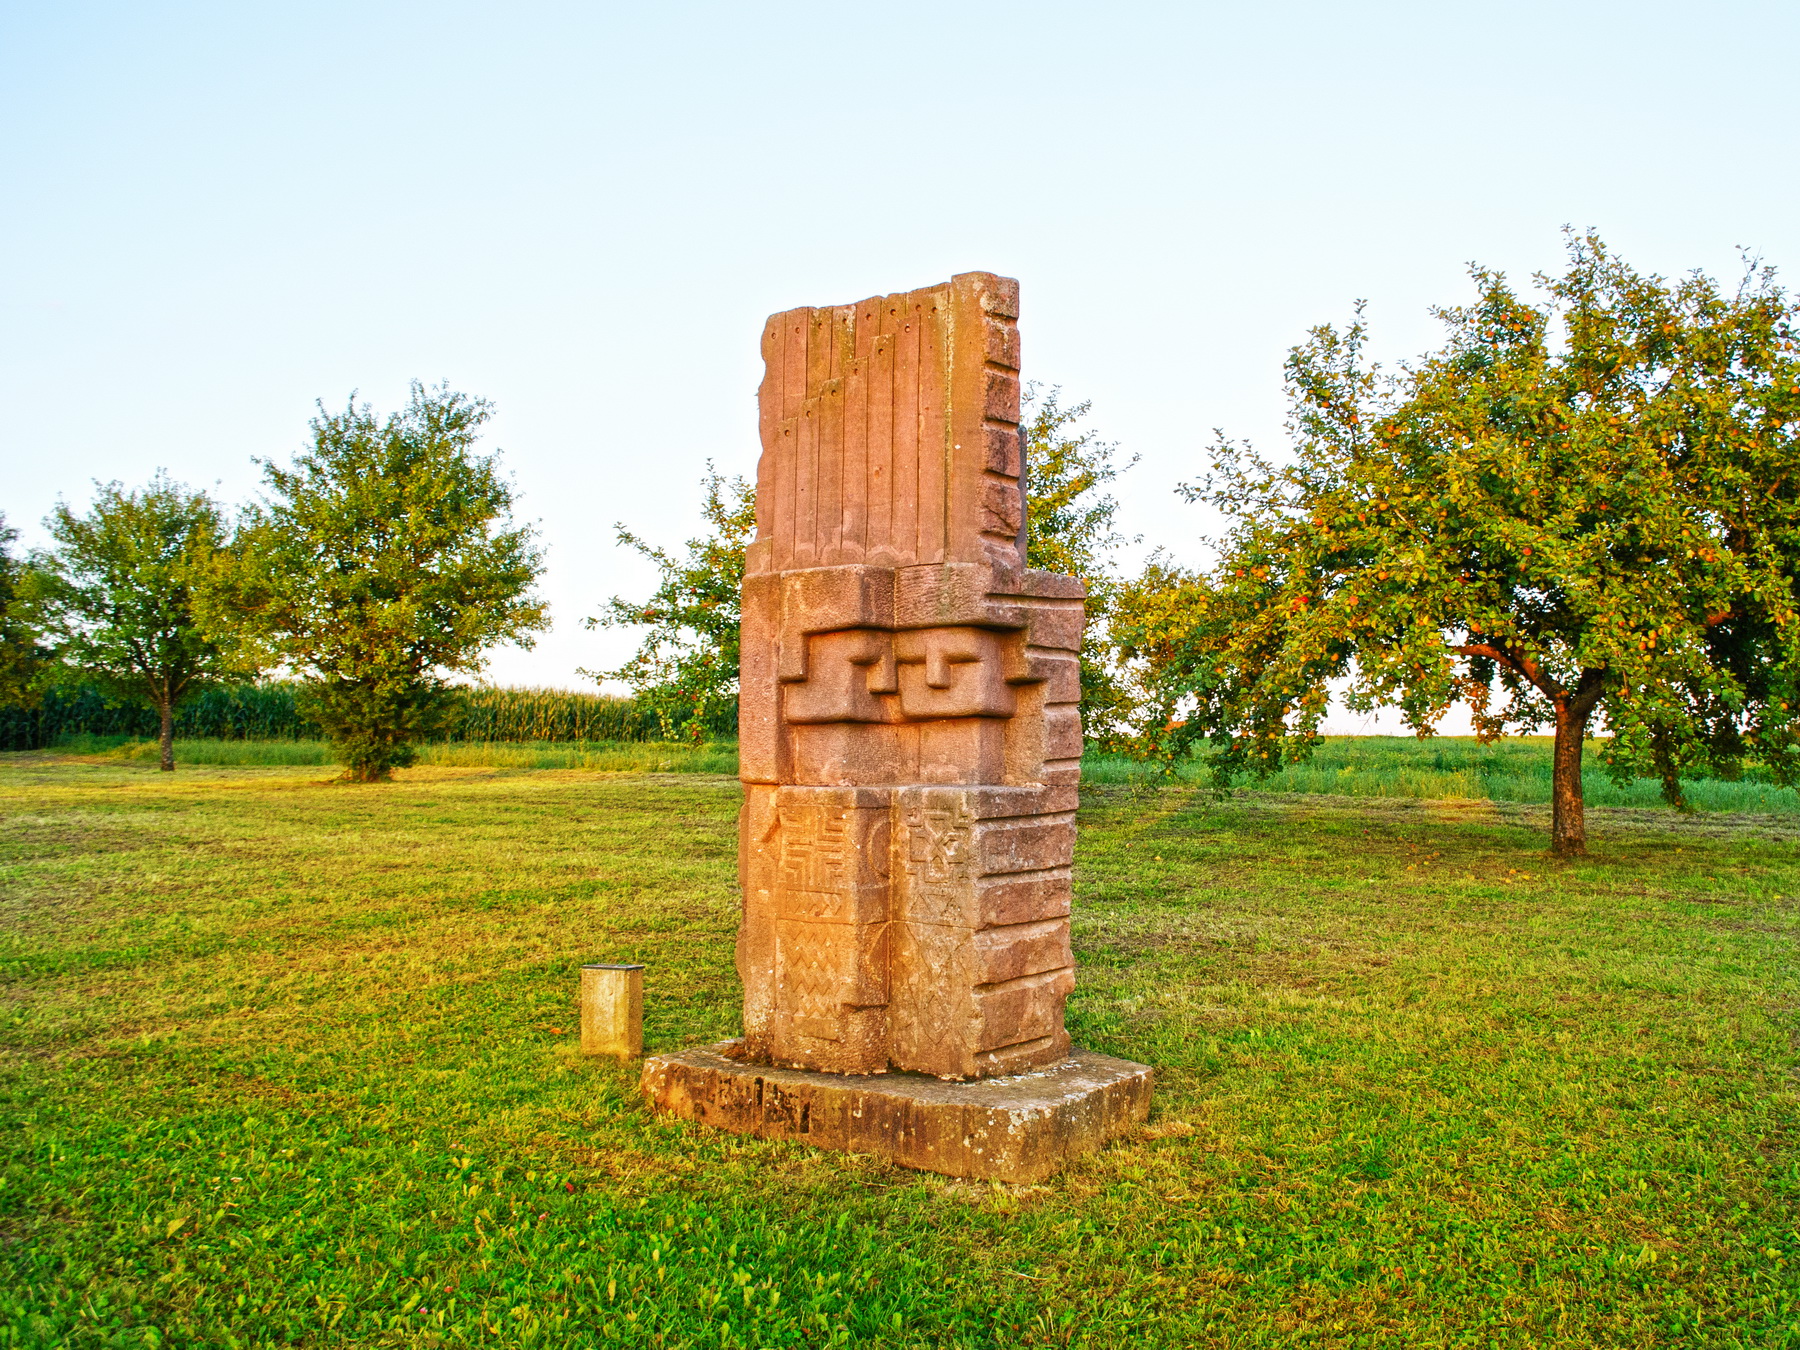 This photo shows a rectangular stone sculpture with different carvings in front of trees.